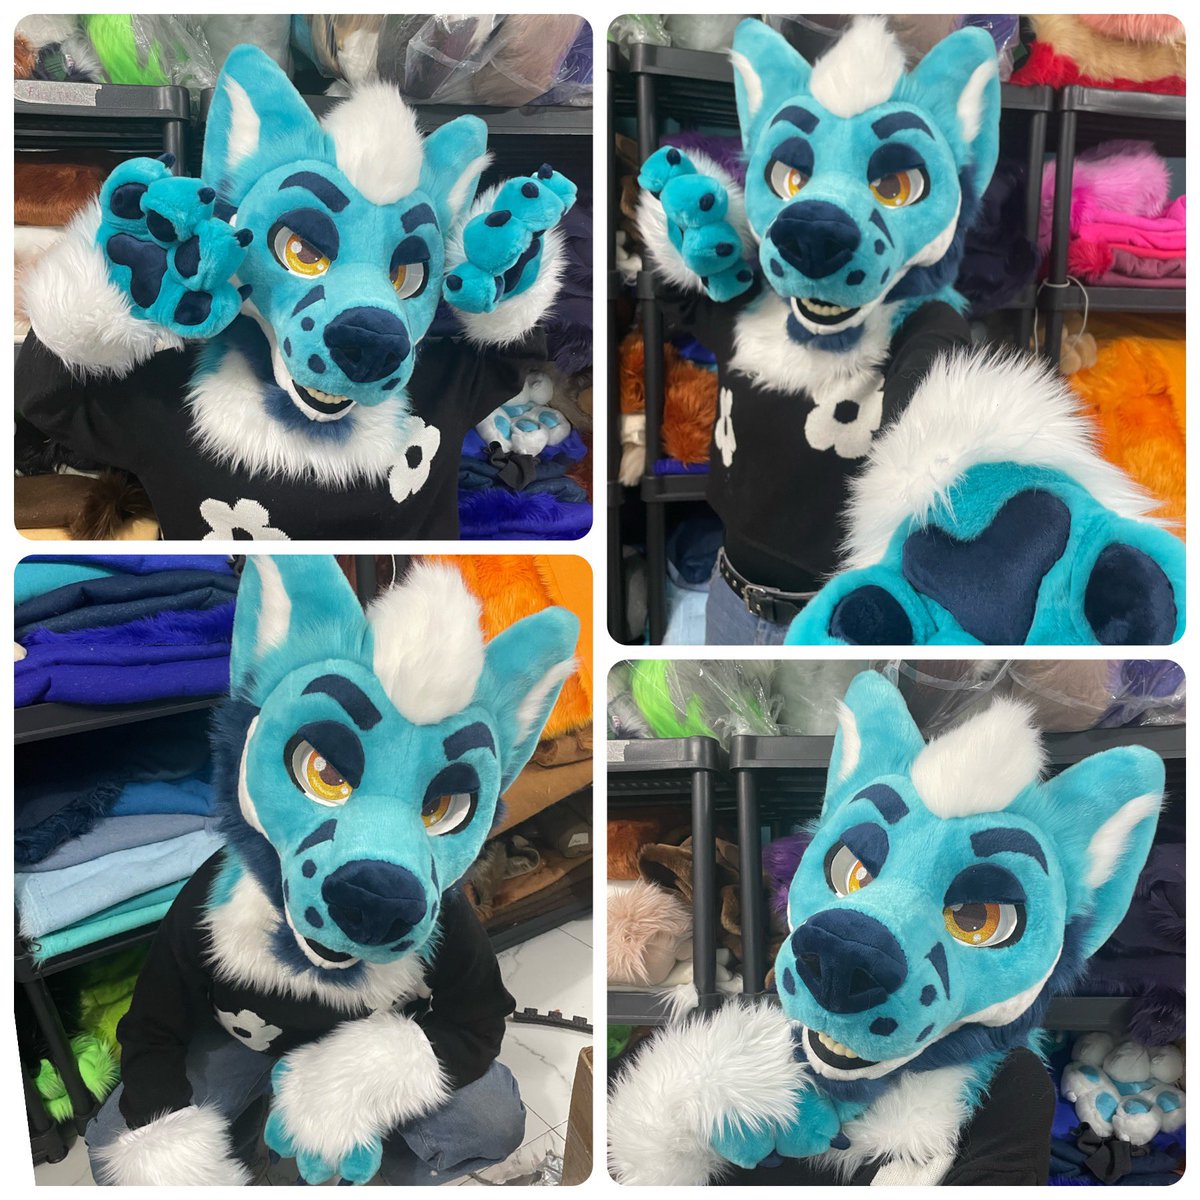 Become a wolf today! 
This fursuit partial is available for 2️⃣2️⃣5️⃣0️⃣USD! 
It includes : head , armsleeves, hands and tail.

If you're interested in it, please send us a DM. More information below⬇️